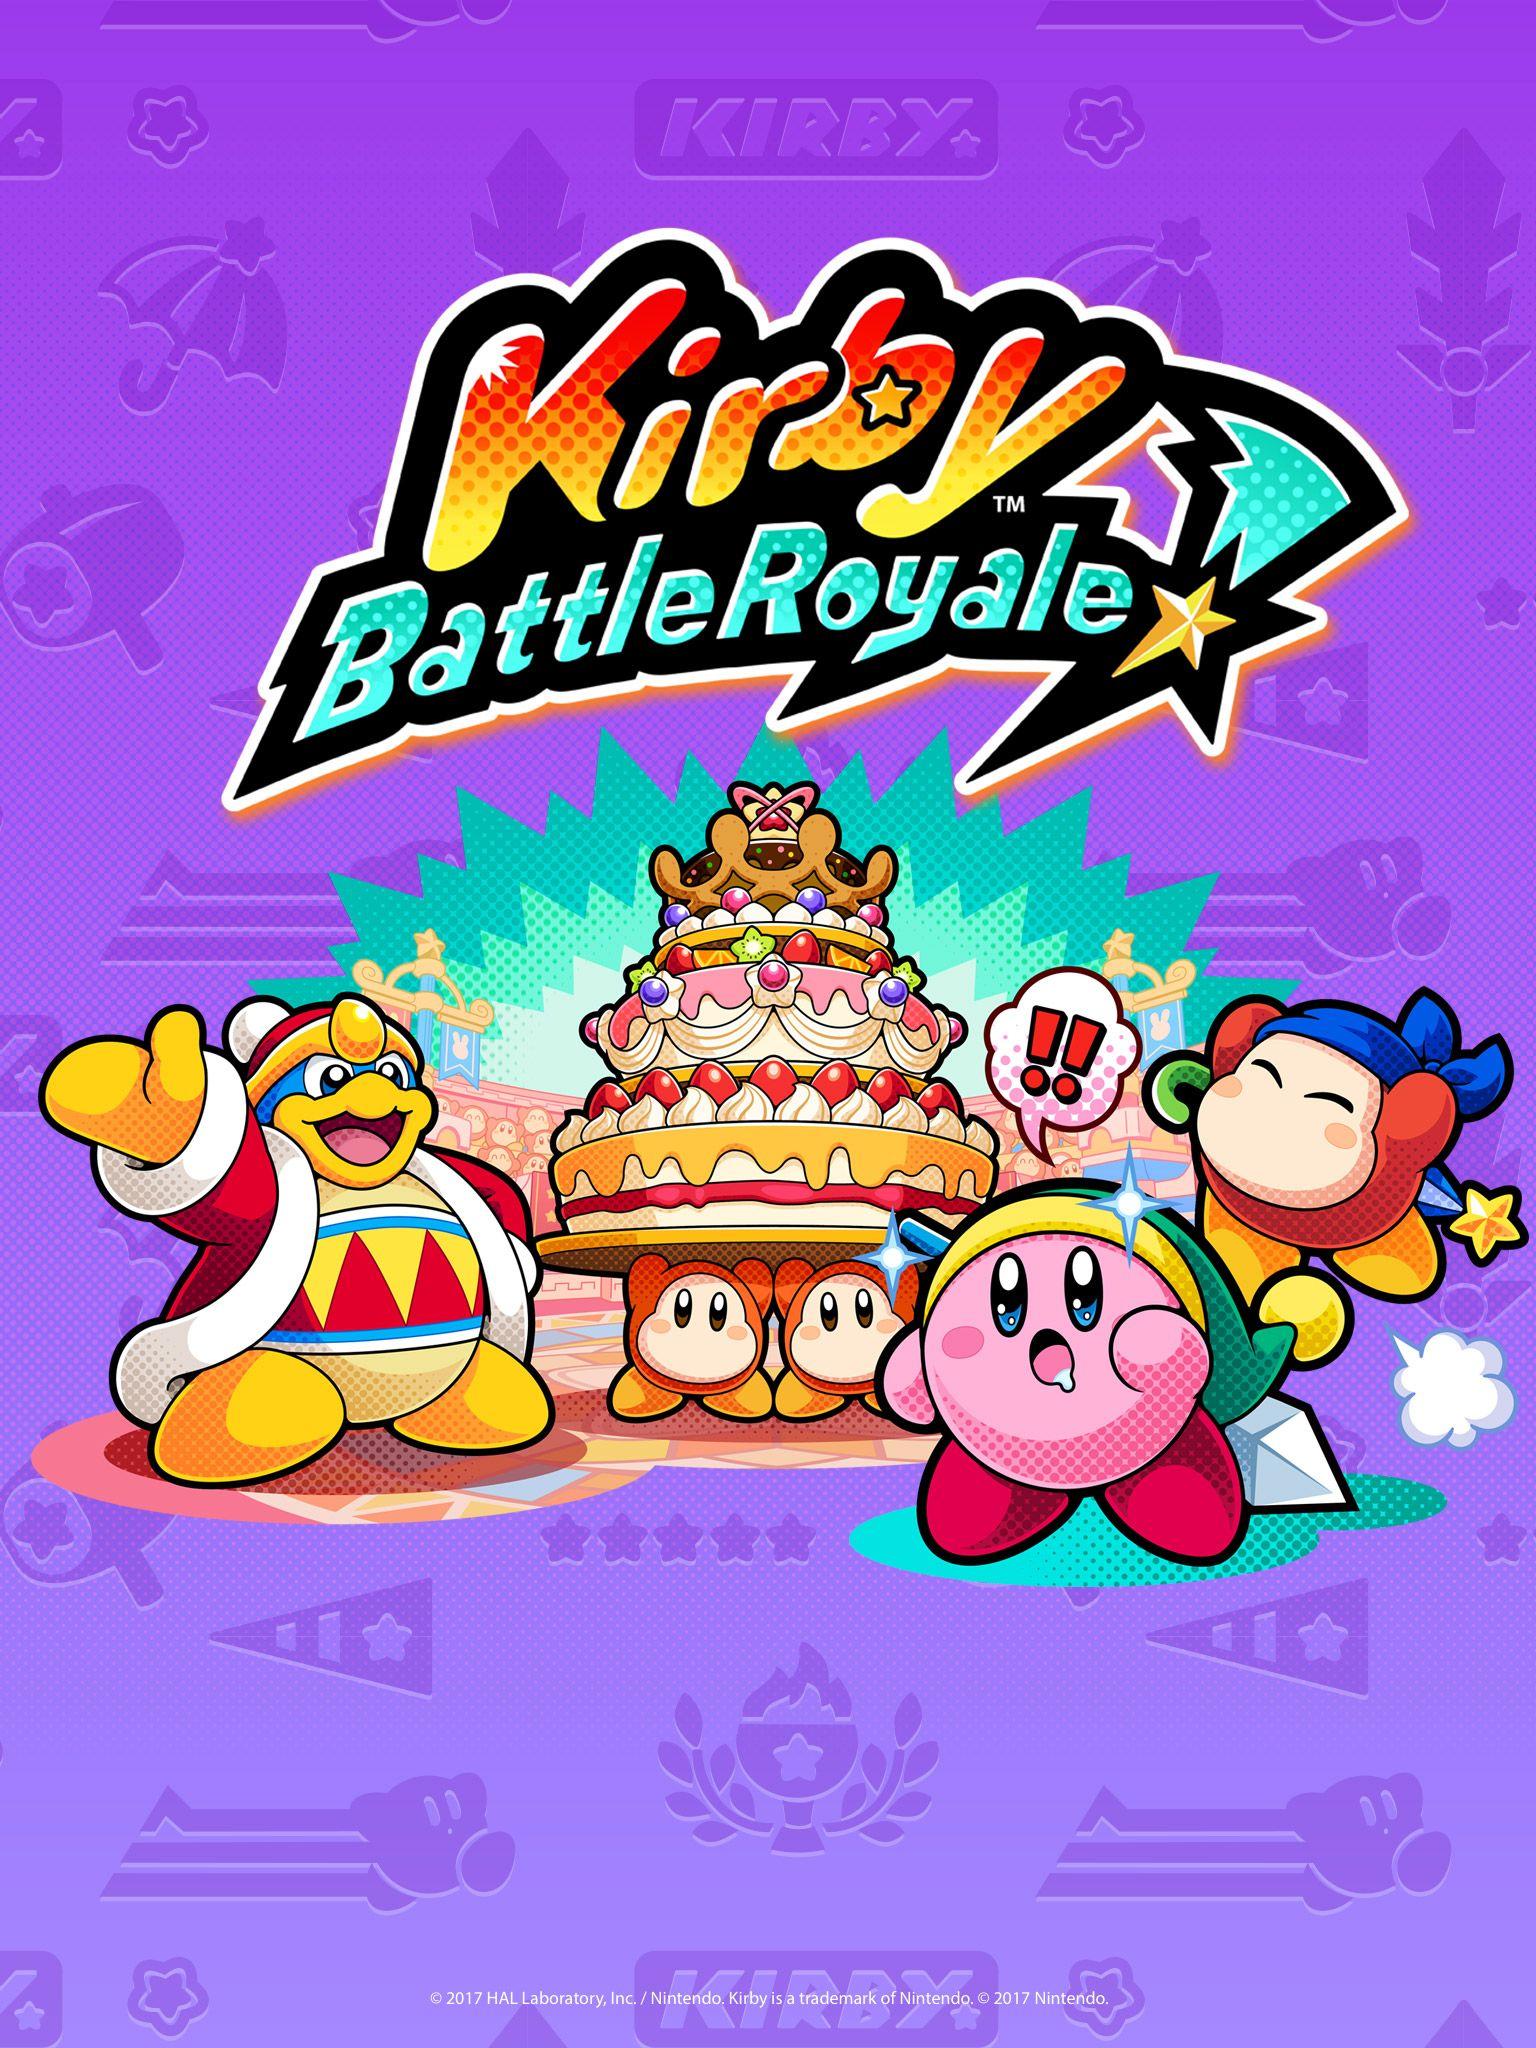 Kirby Battle Royale for the Nintendo 3DS™ family of systems